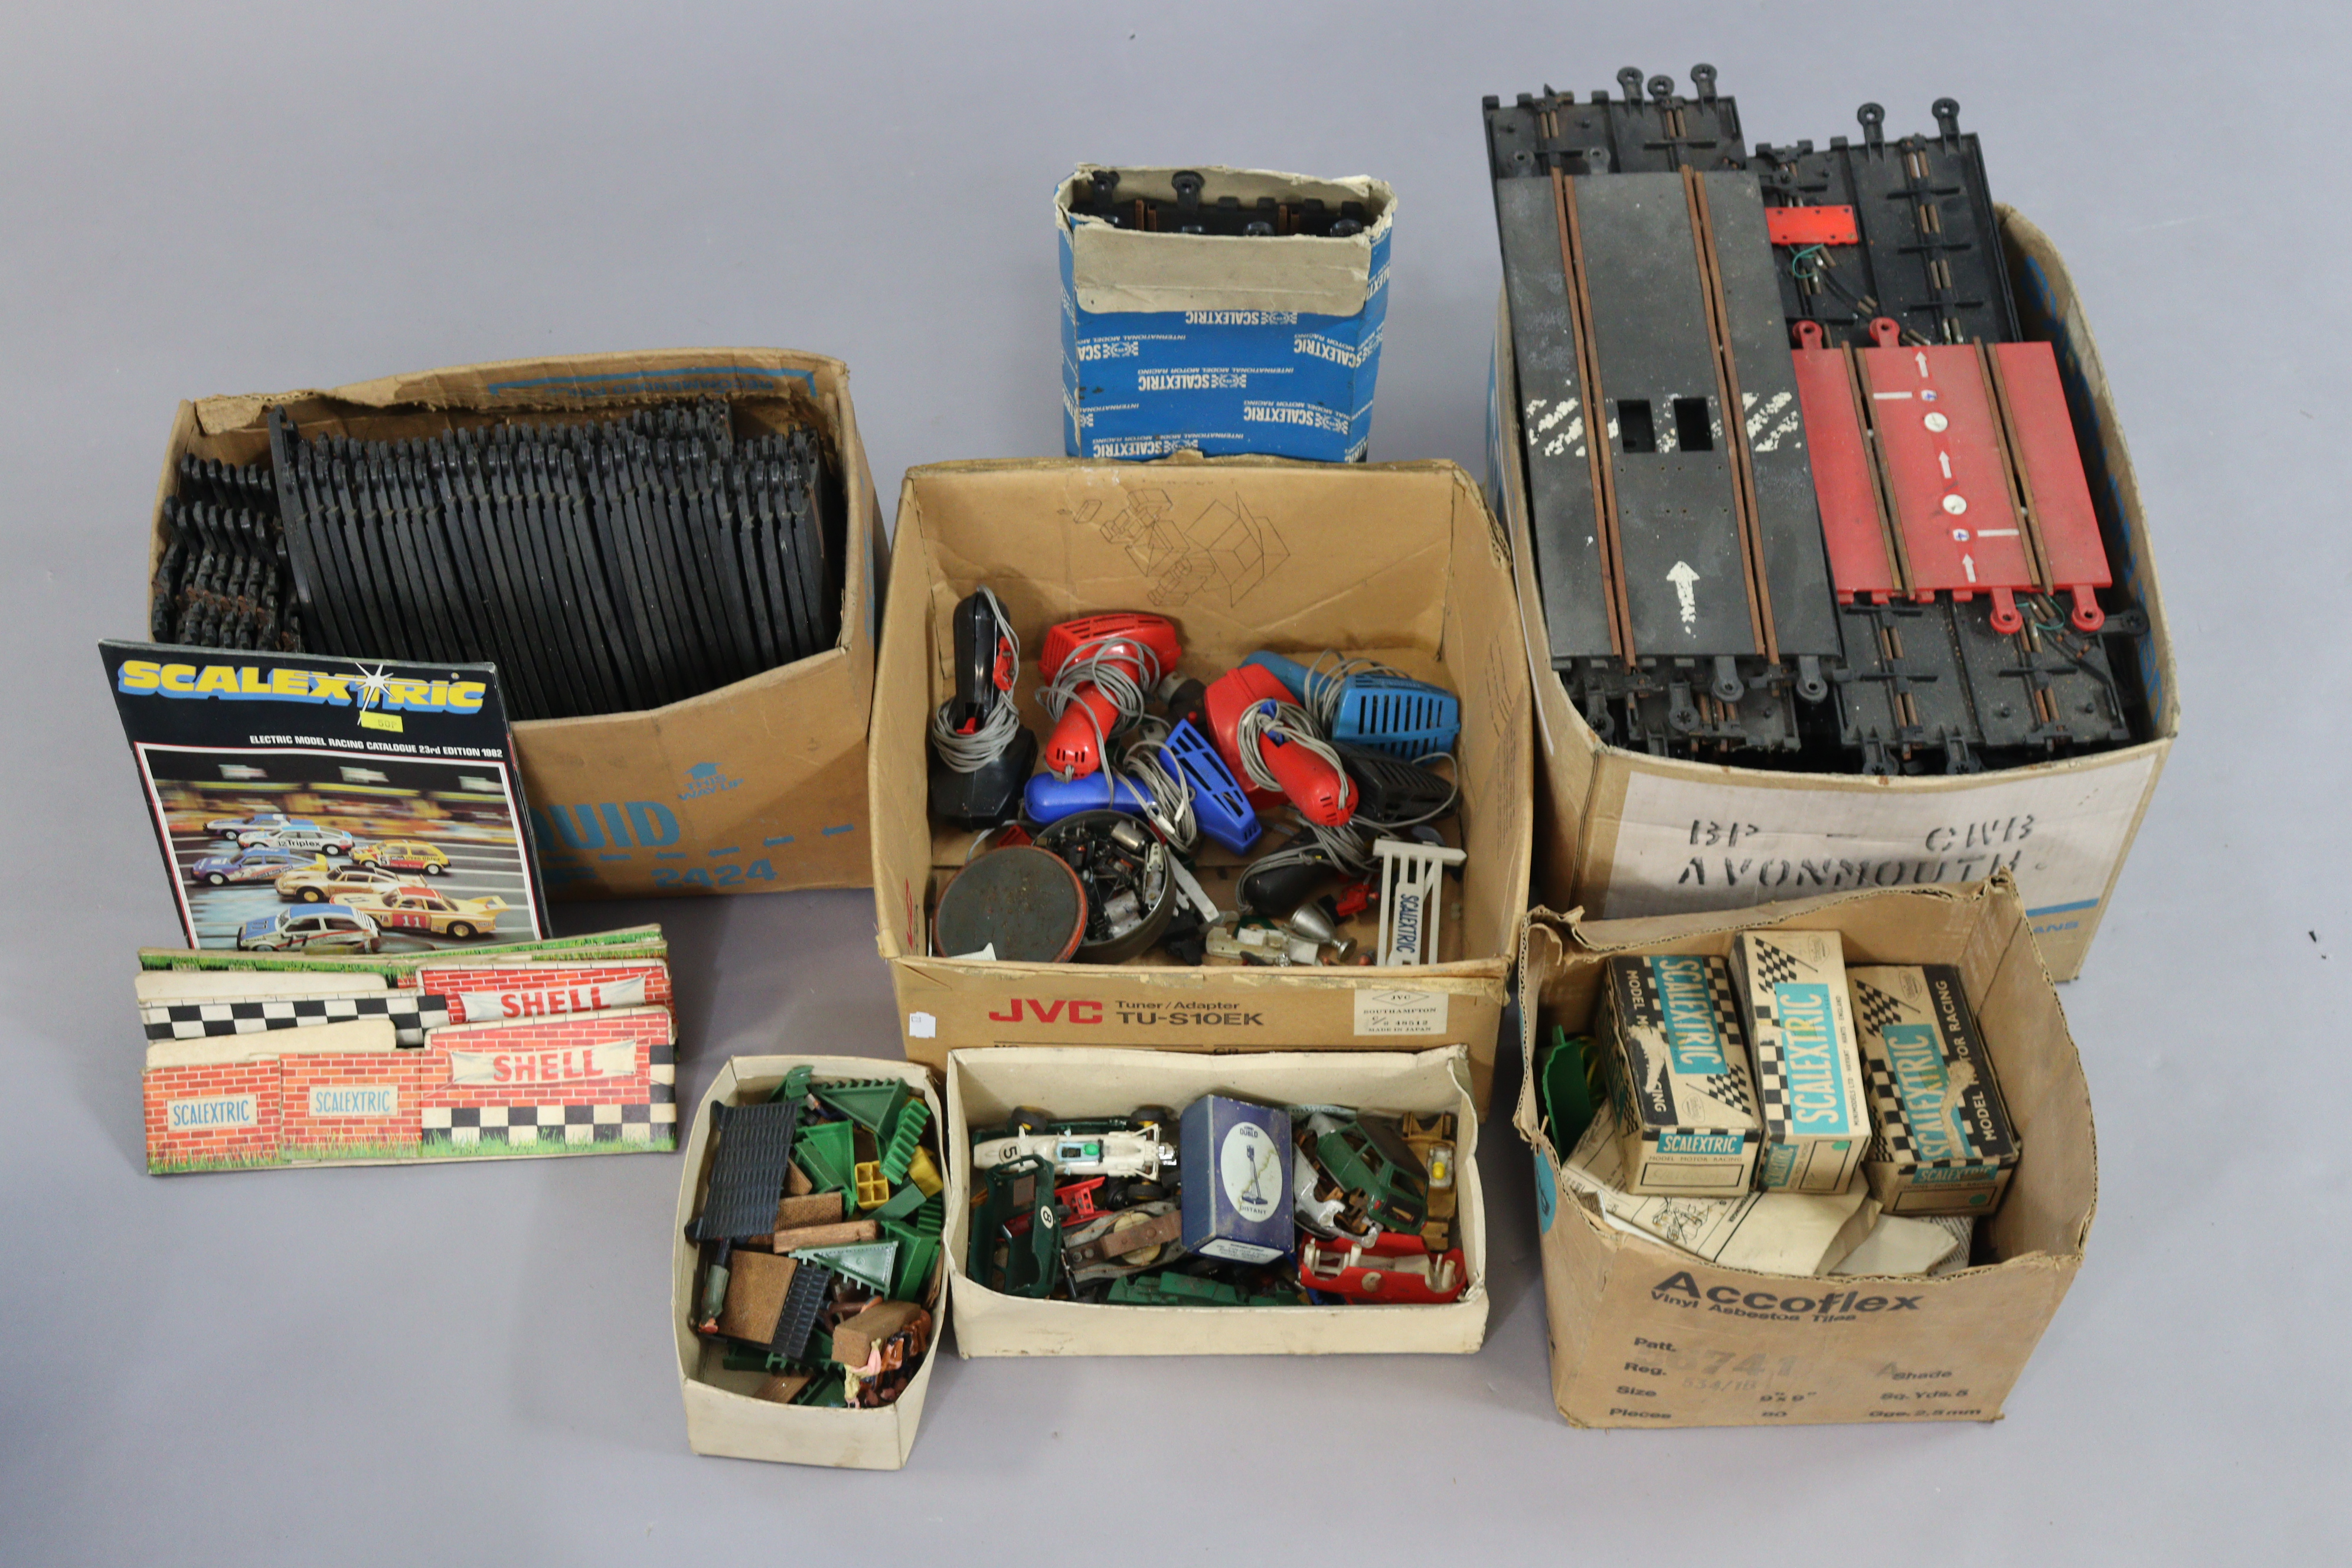 Various Scalextric model cars, racing track, model figures, etc, boxed & unboxed.